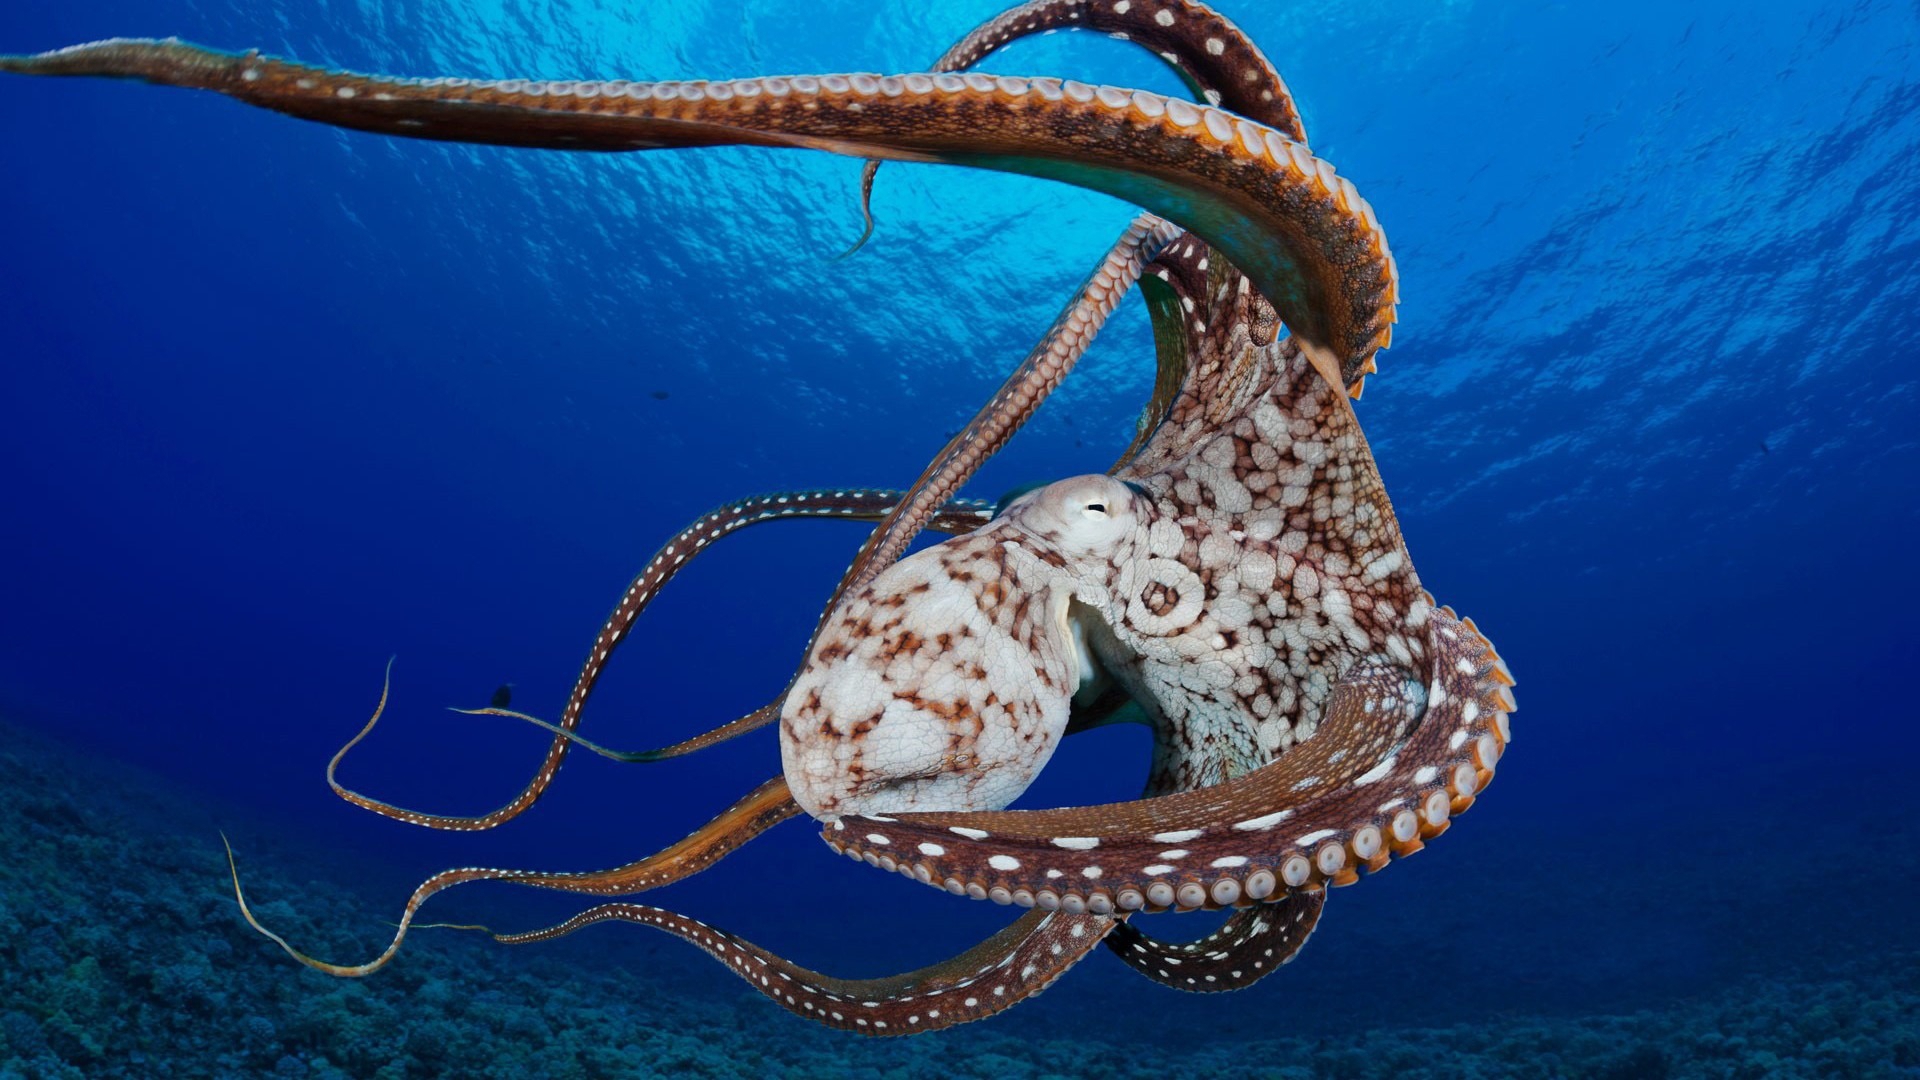 Octopus Wallpaper Image Photos Pictures Background